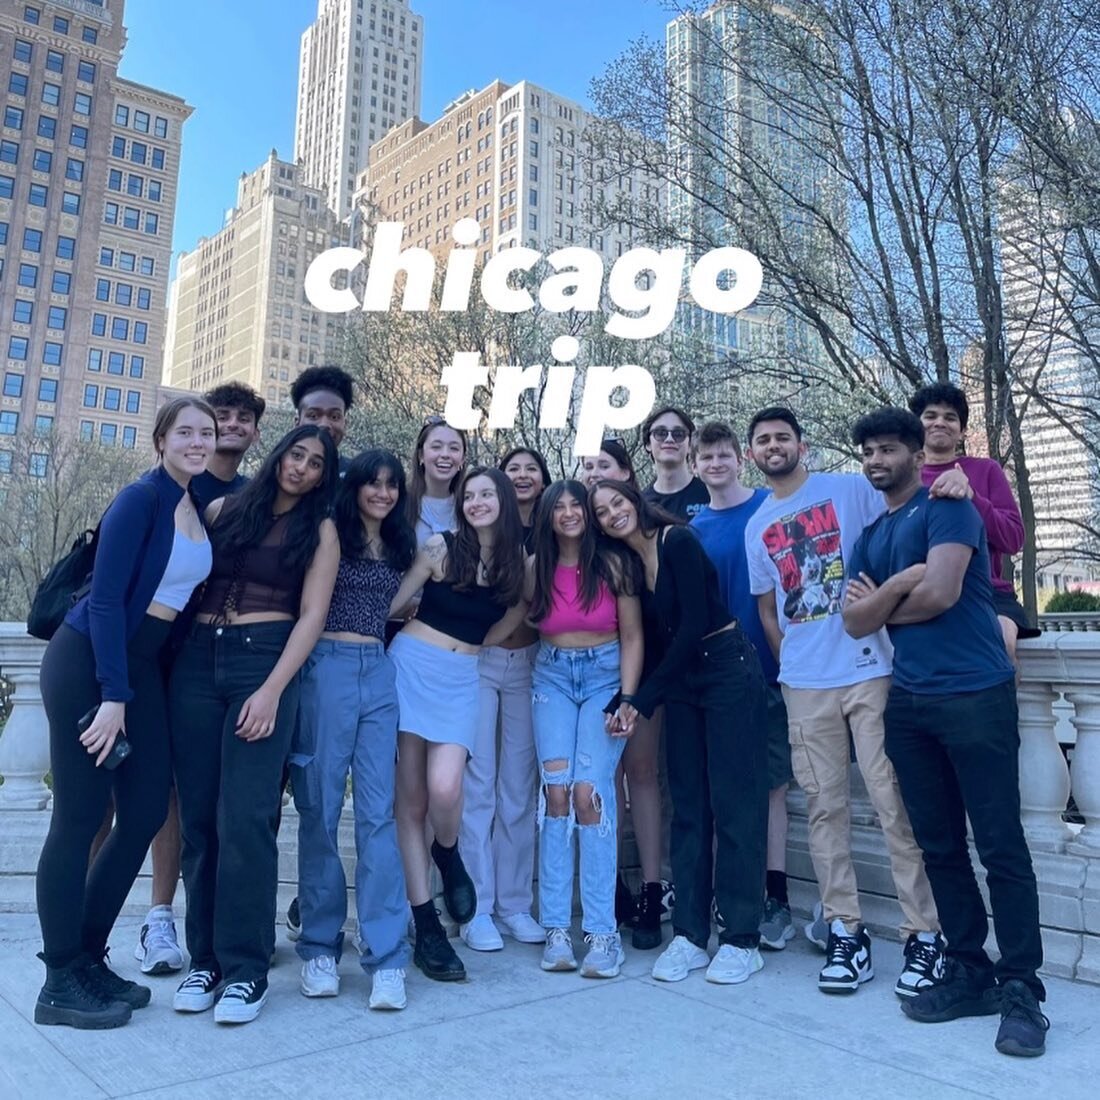 It&rsquo;s the city that&rsquo;s exciting, it&rsquo;s the city that&rsquo;s inviting&mdash;It&rsquo;s Chicago!
Our brothers travelled over to the windy city for our first professional trip since covid! Our brothers were able to connect with various c